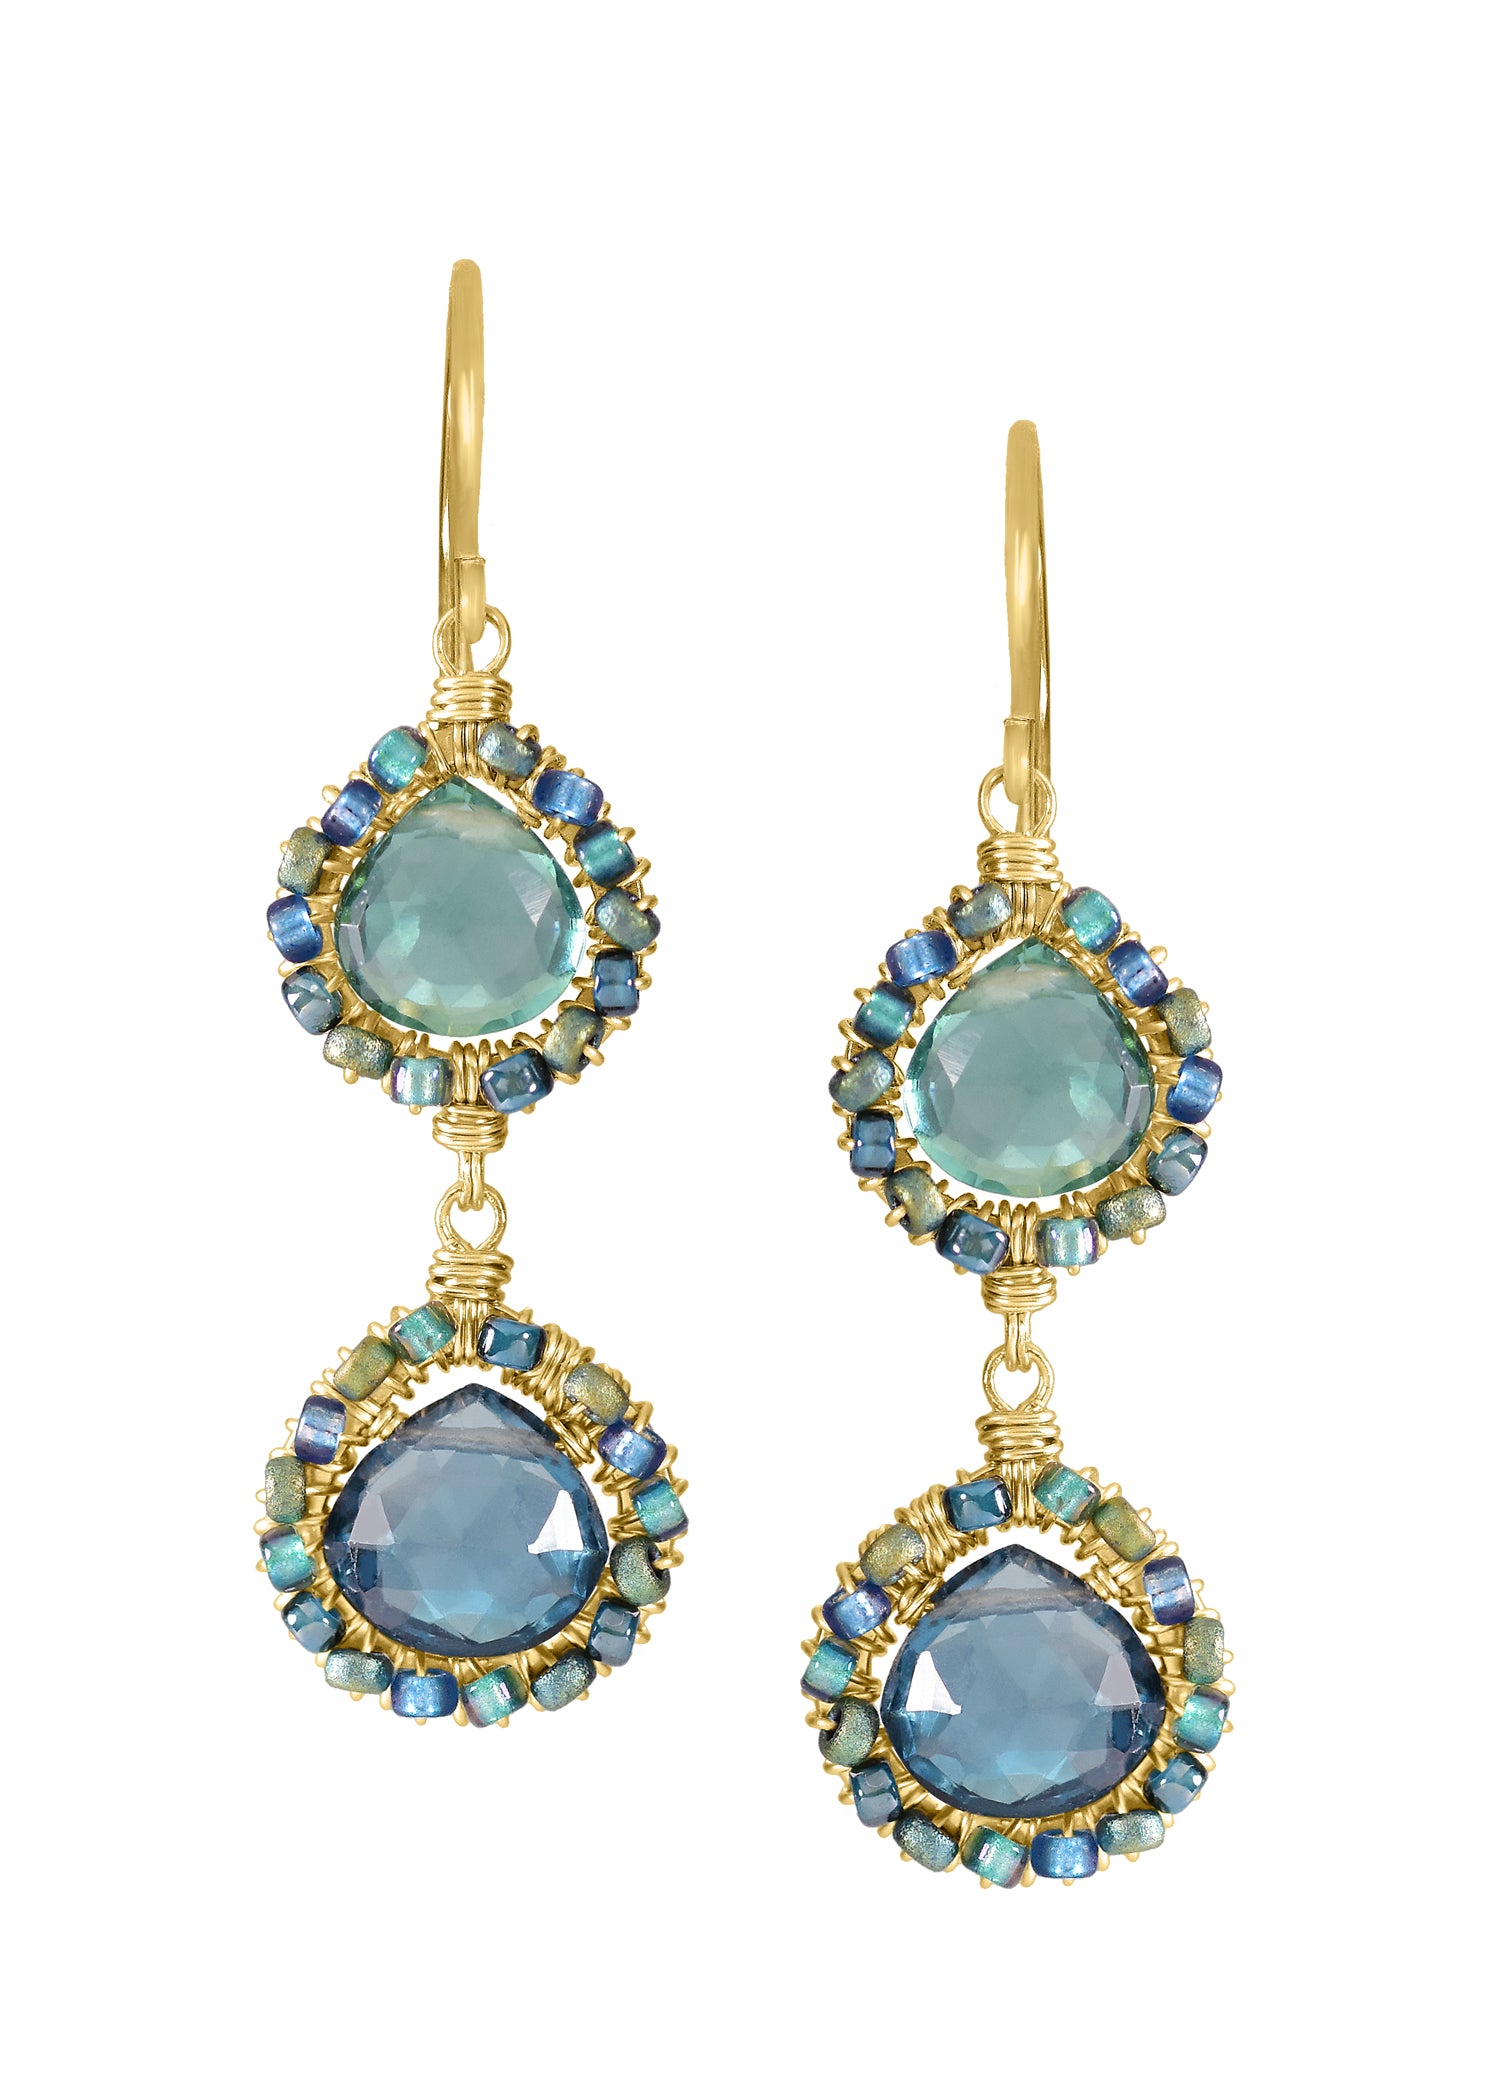 Green quartz Blue quartz Seed beads 14k gold fill Earrings measure 1-5/16" in length (including ear wires) and 3/8" in width at the widest point Handmade in our Los Angeles studio